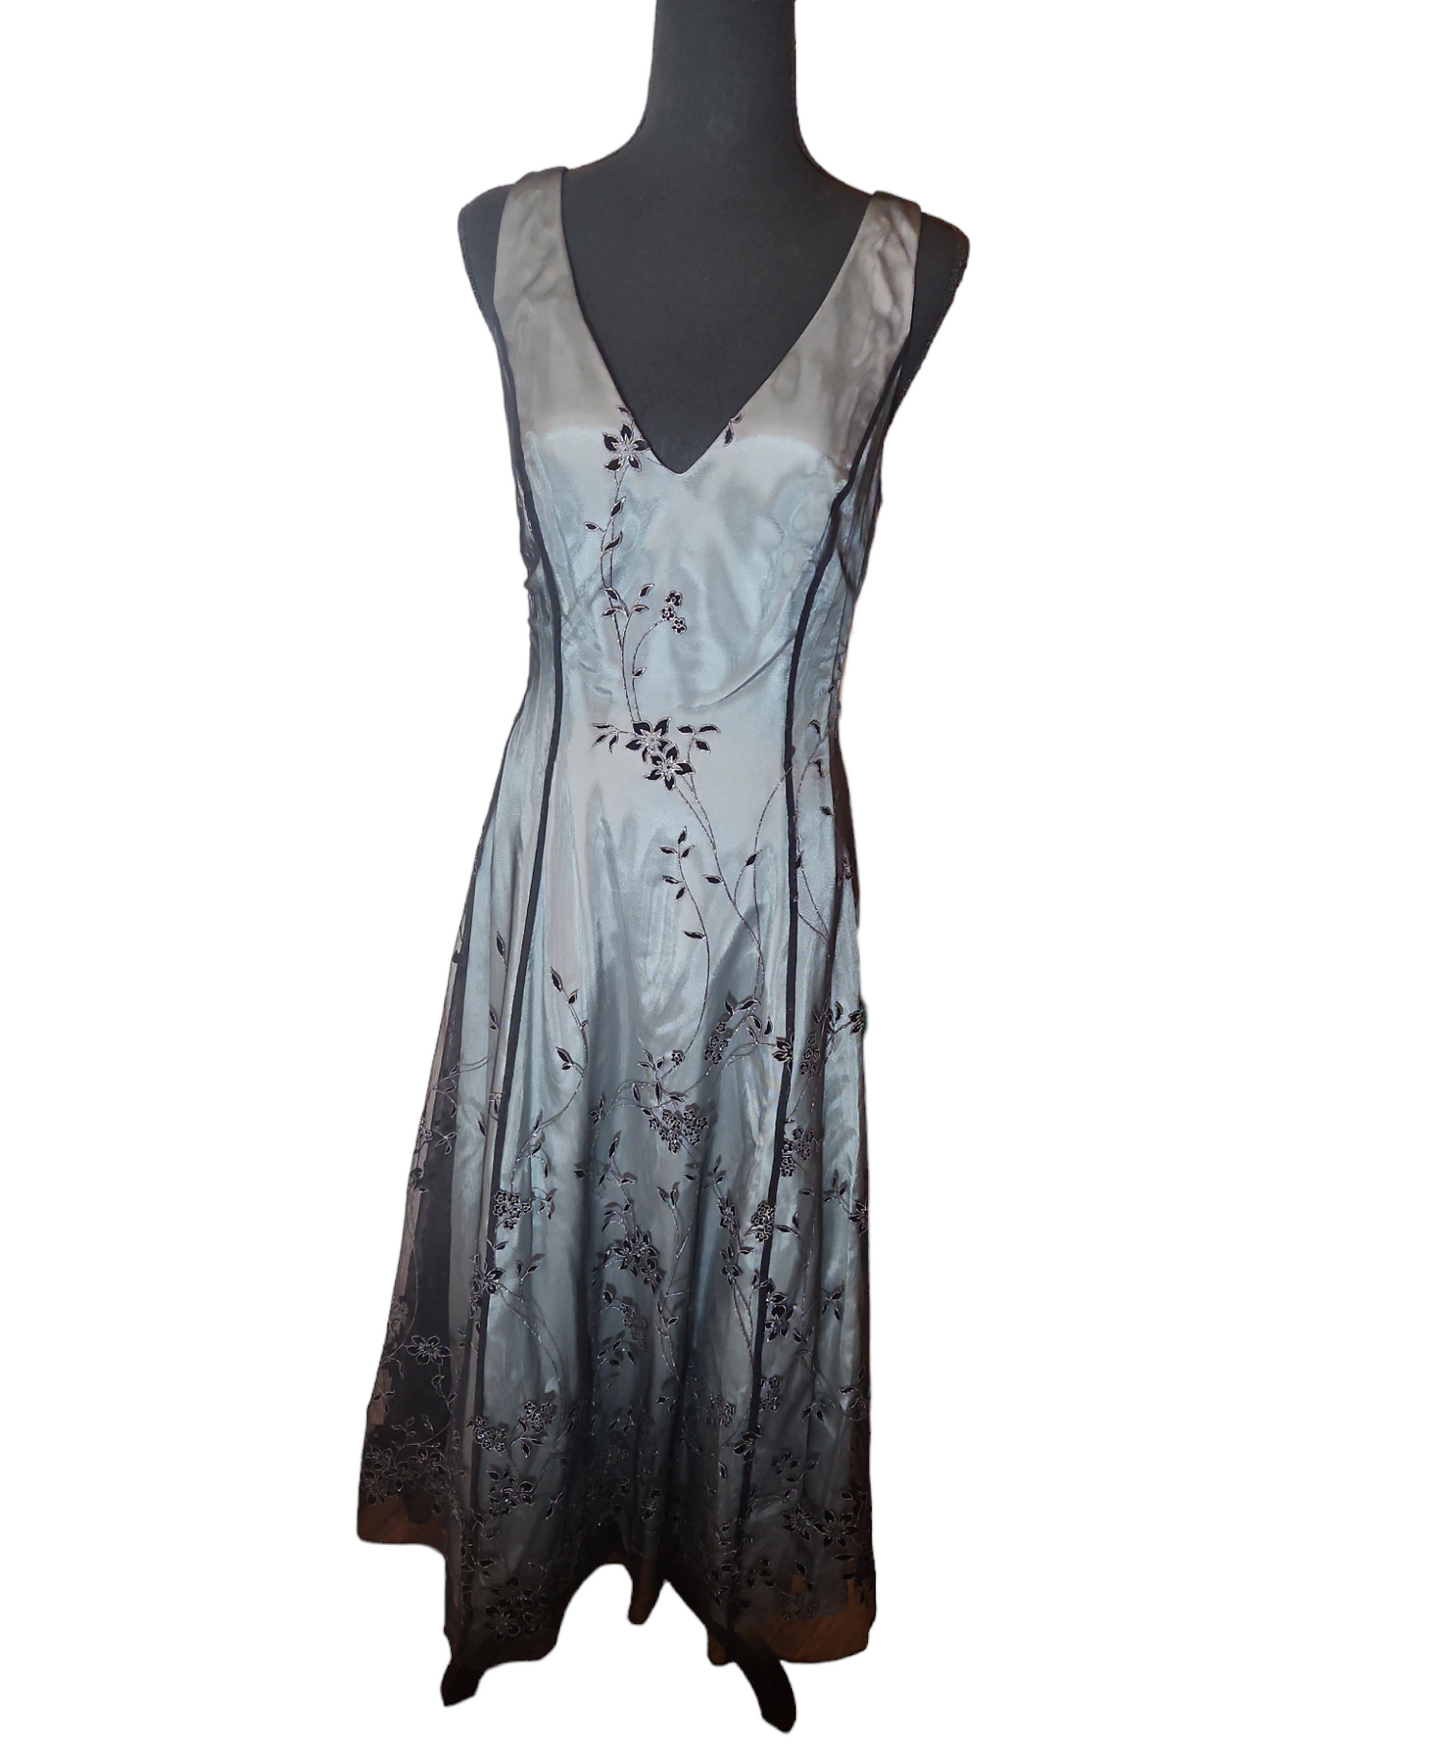 Papell Boutique Evening - Silver w/ Black Sheer Dress